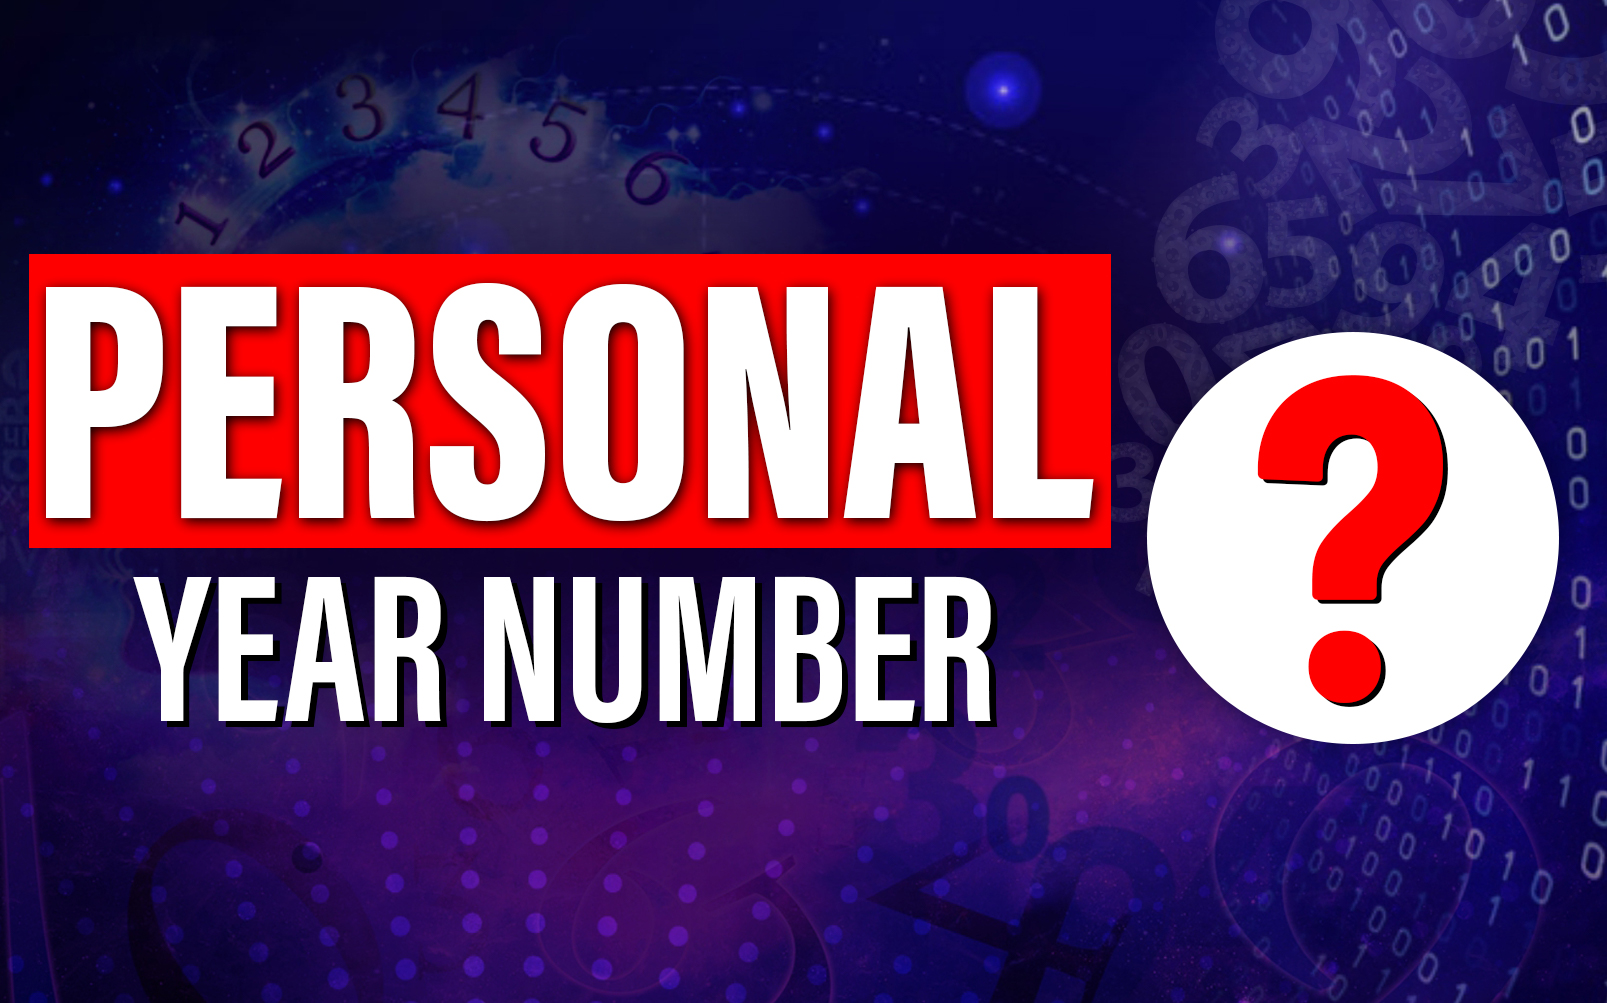 Personal Year Numerology Calculate your Personal Year Number